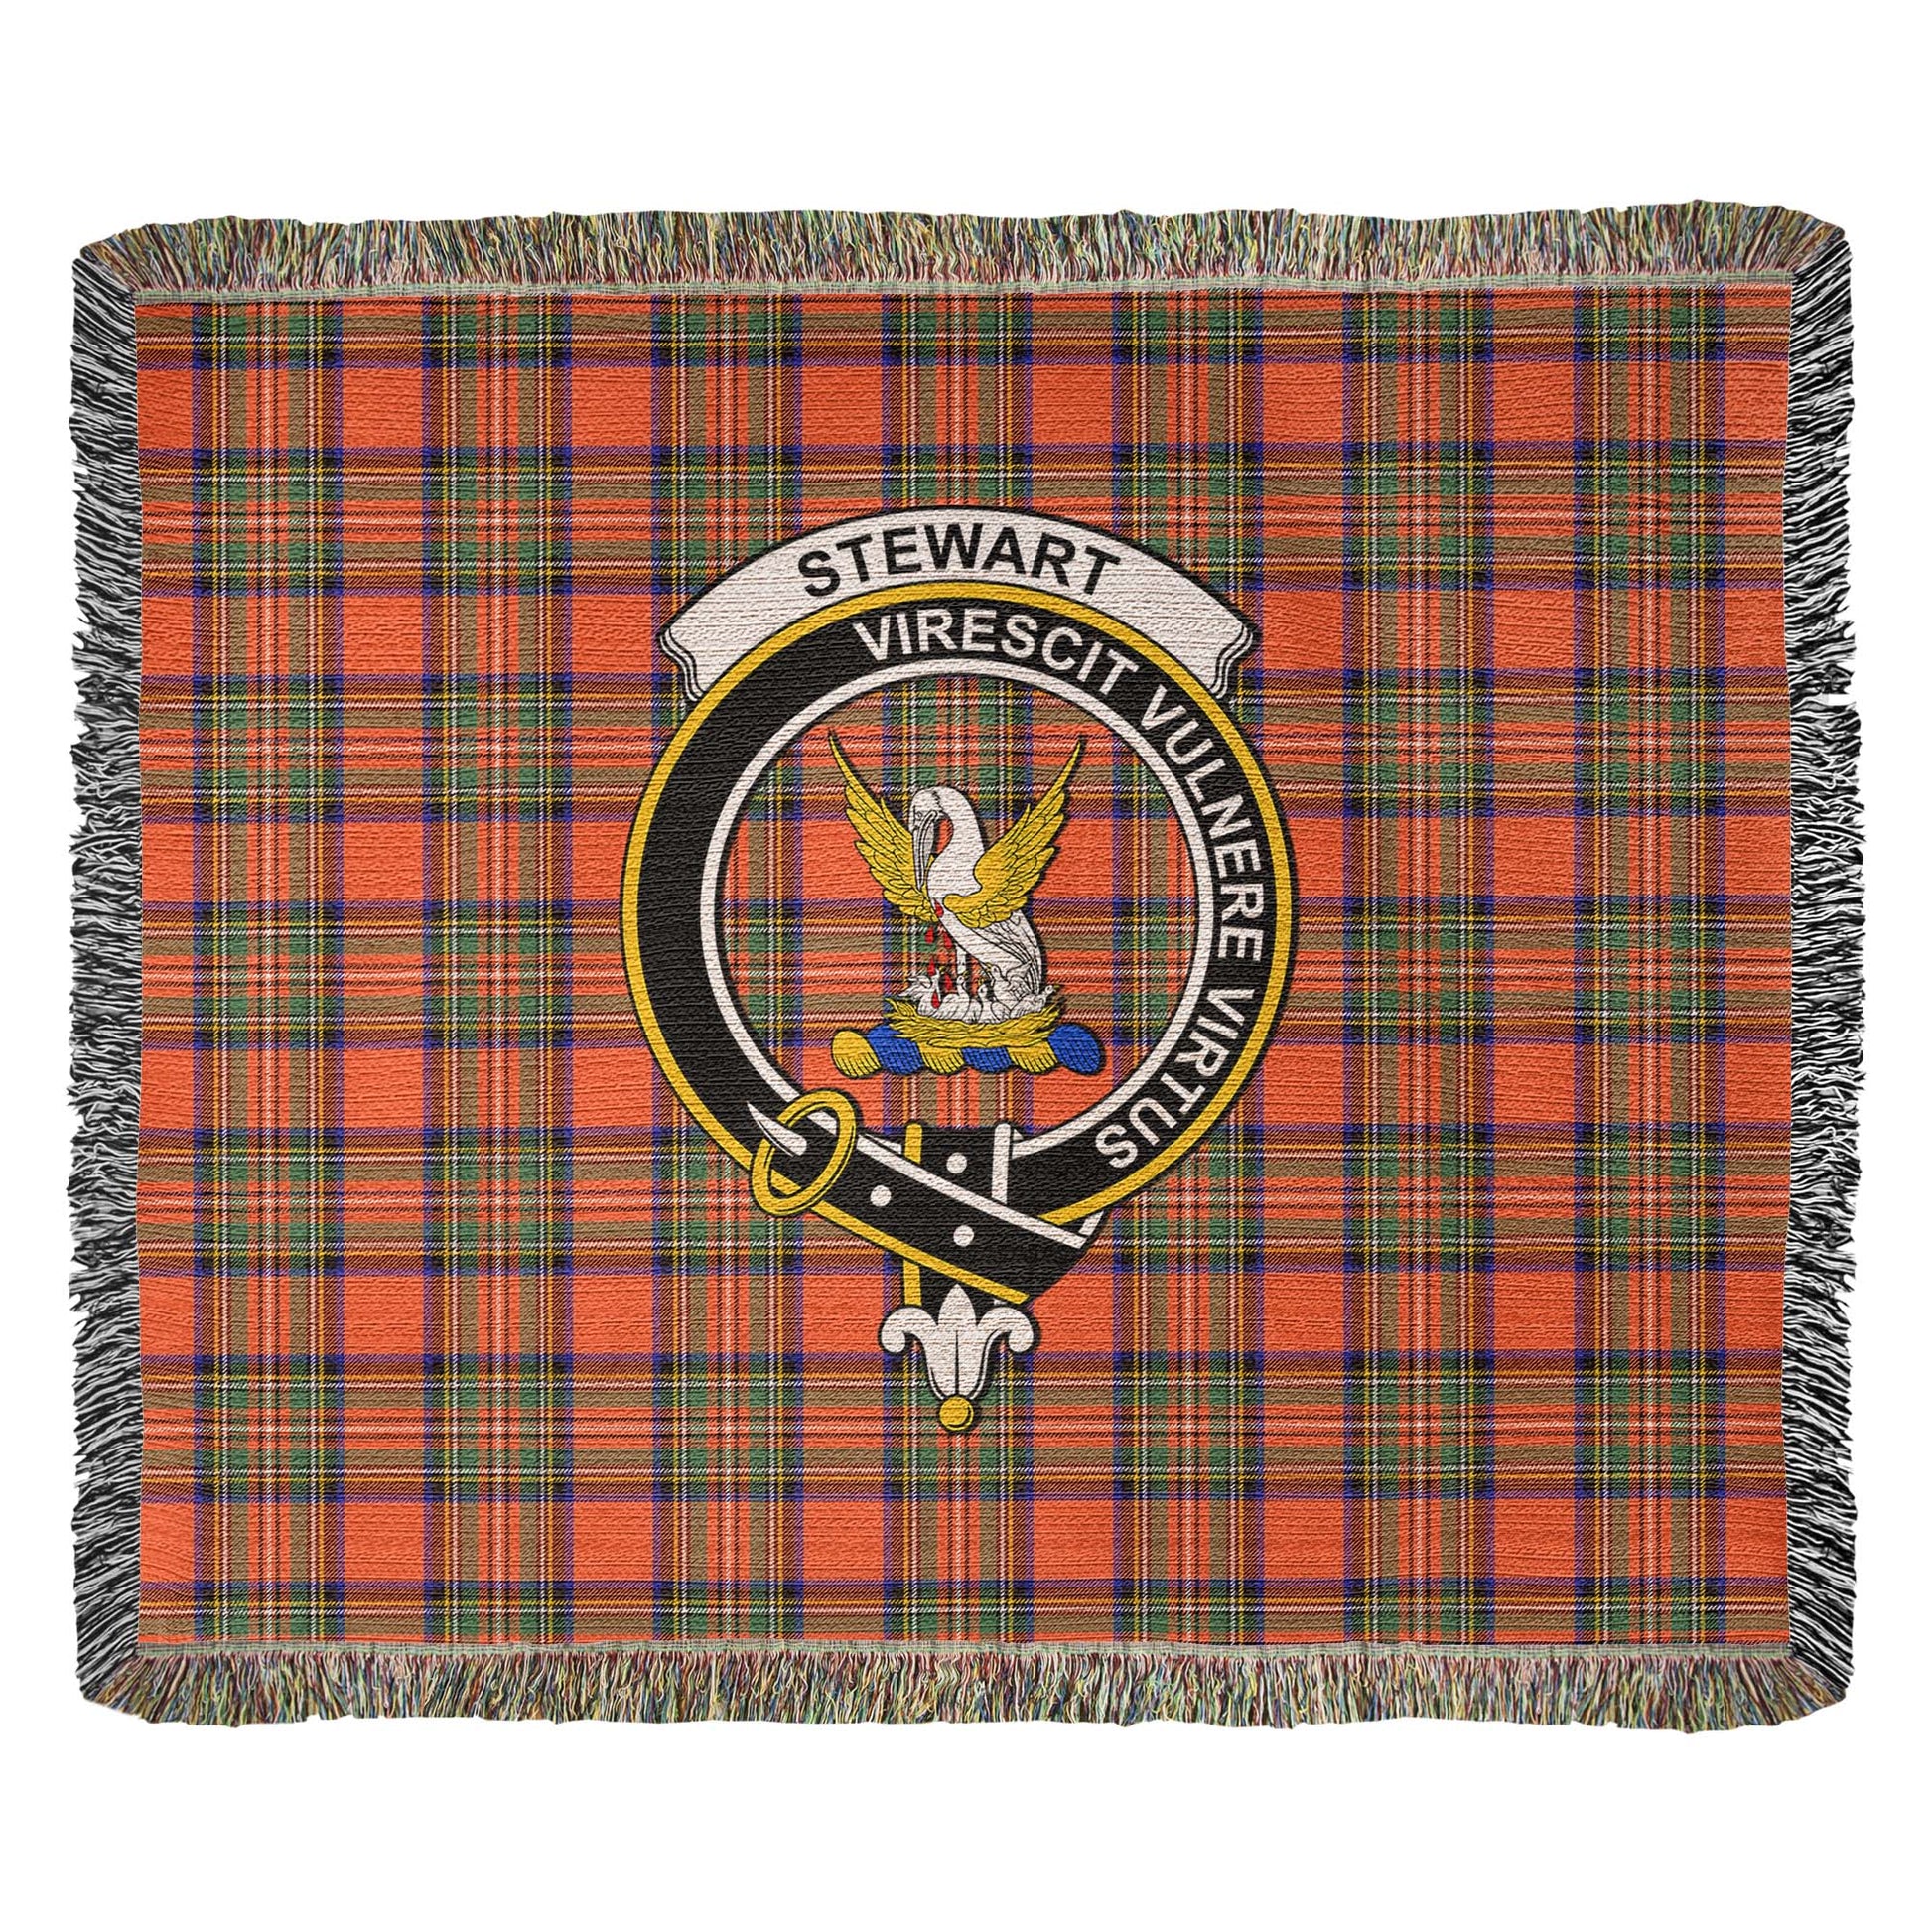 Tartan Vibes Clothing Stewart Royal Ancient Tartan Woven Blanket with Family Crest